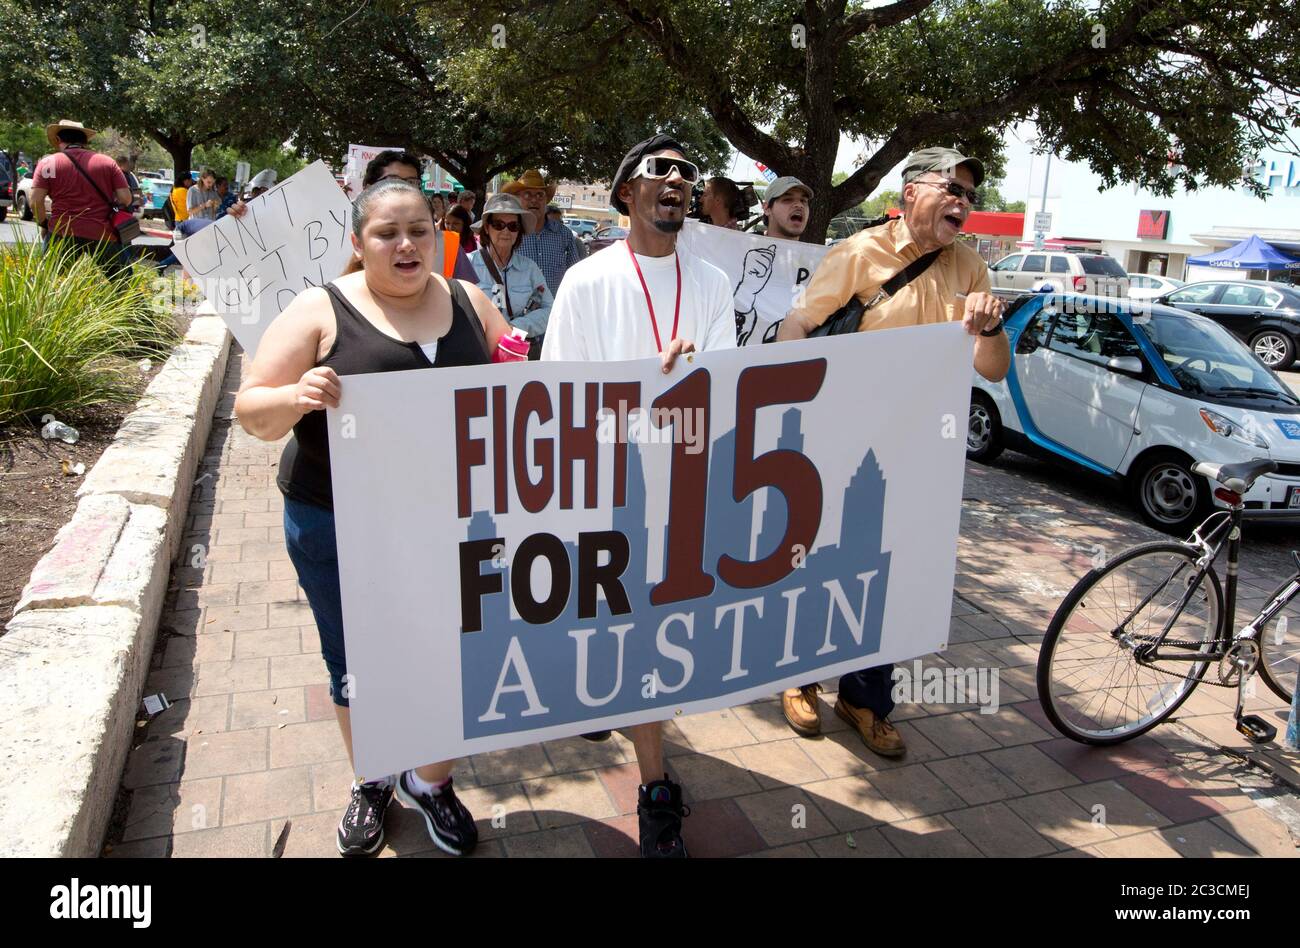 August 29, 2013 Austin, Texas USA: Fast-food workers and sympathizers protest  low wages for people working for low wages at restaurants. Workers and organizers across the country are asking for $15 an hour, an increase from the $7.25 on average they currently make. © Marjorie Kamys Cotera/ Daemmrich Photography Stock Photo